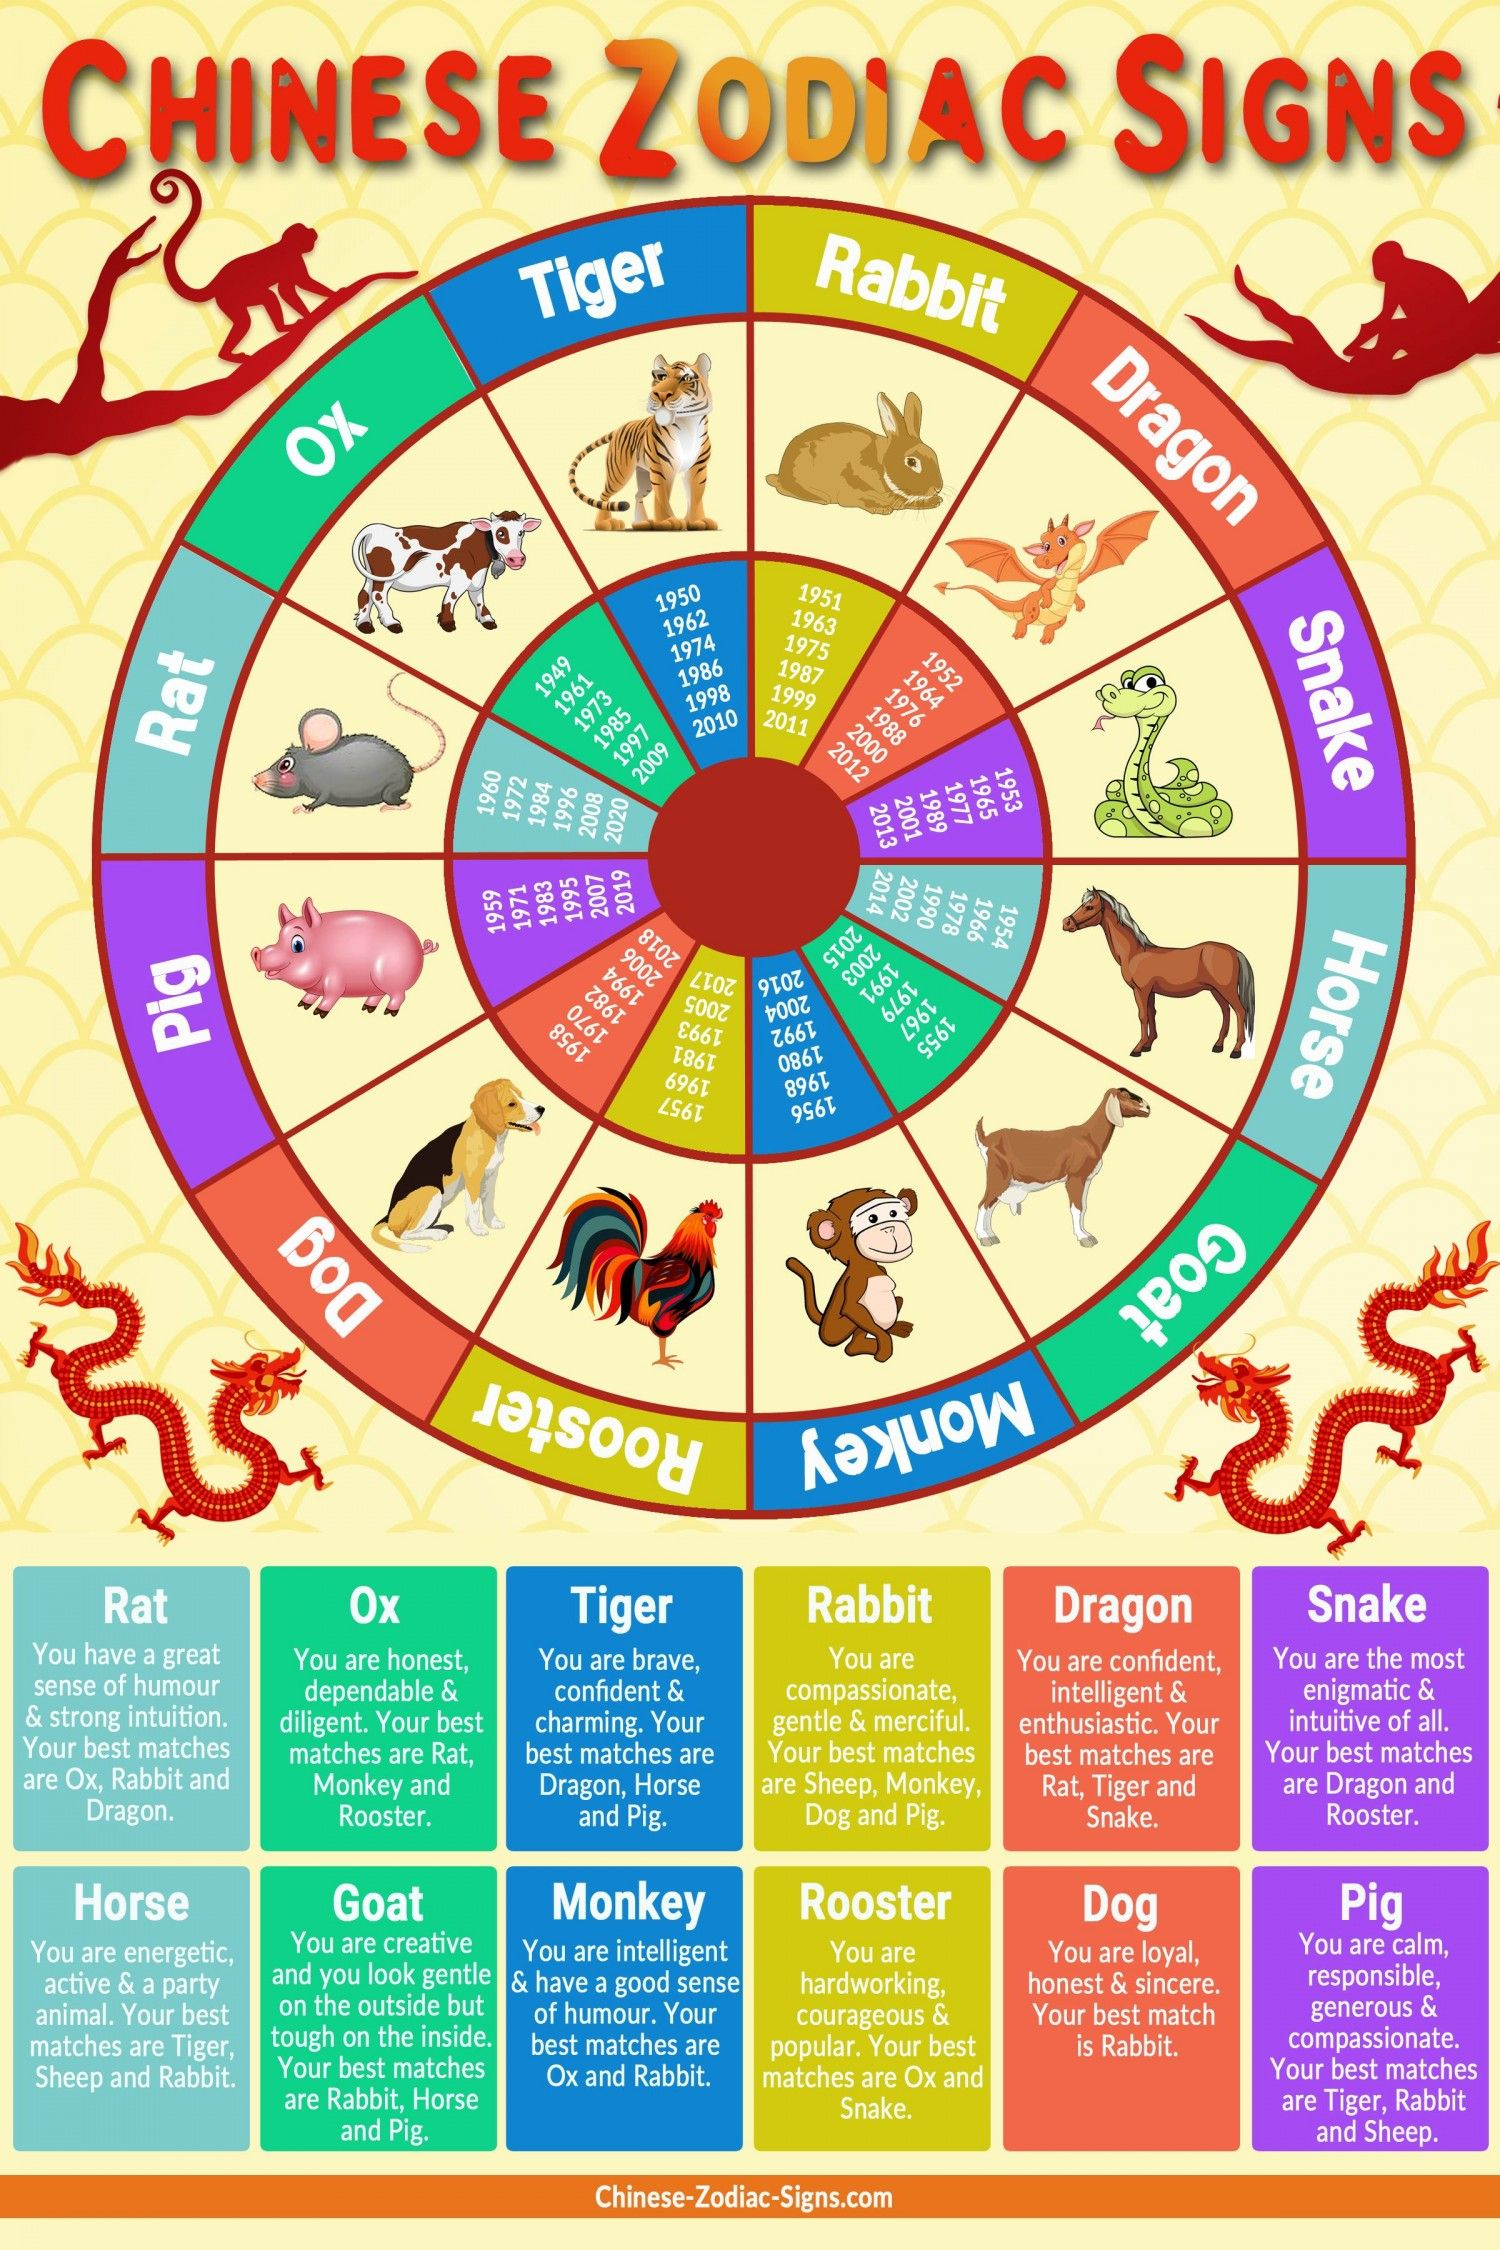 Chinese Zodiac Signs Infographic | Chinese Zodiac Signs